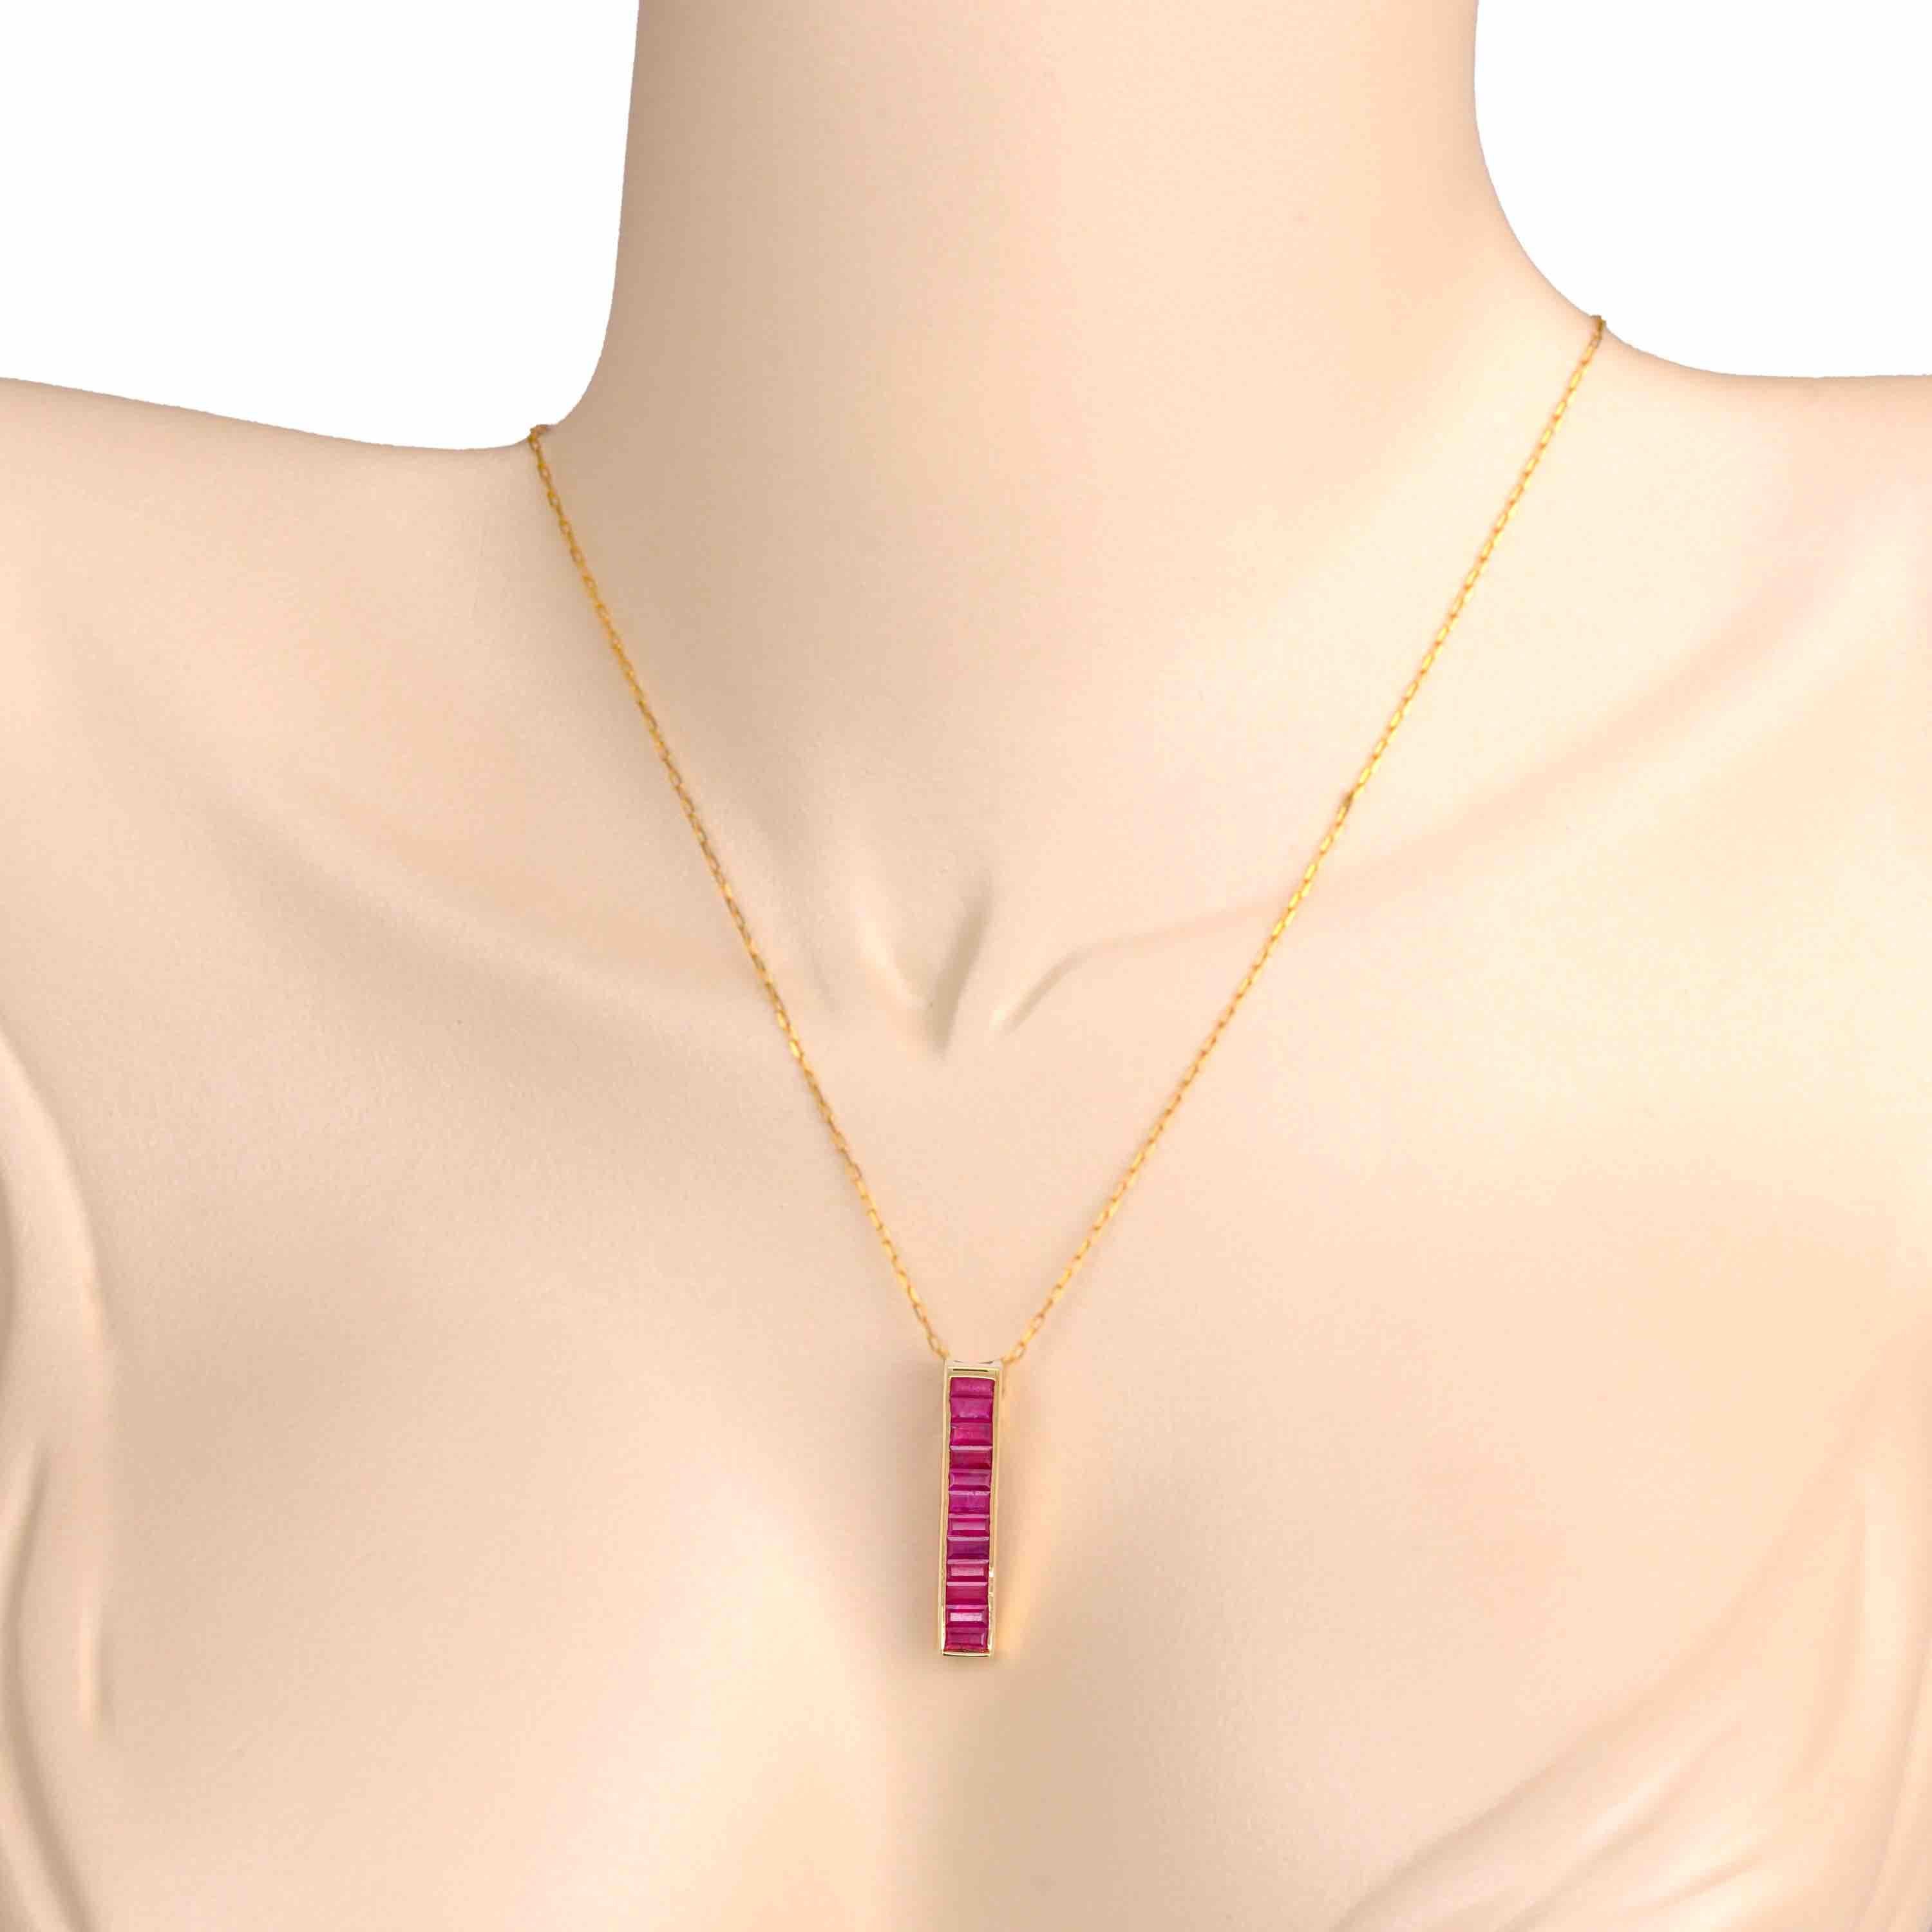 Elevate your style with the Classic Ruby Bar Pendant, a captivating embodiment of sophistication and passion. This pendant boasts a sleek and modern design, featuring a row of exquisite 4x2 mm baguette rubies gracefully set within a polished